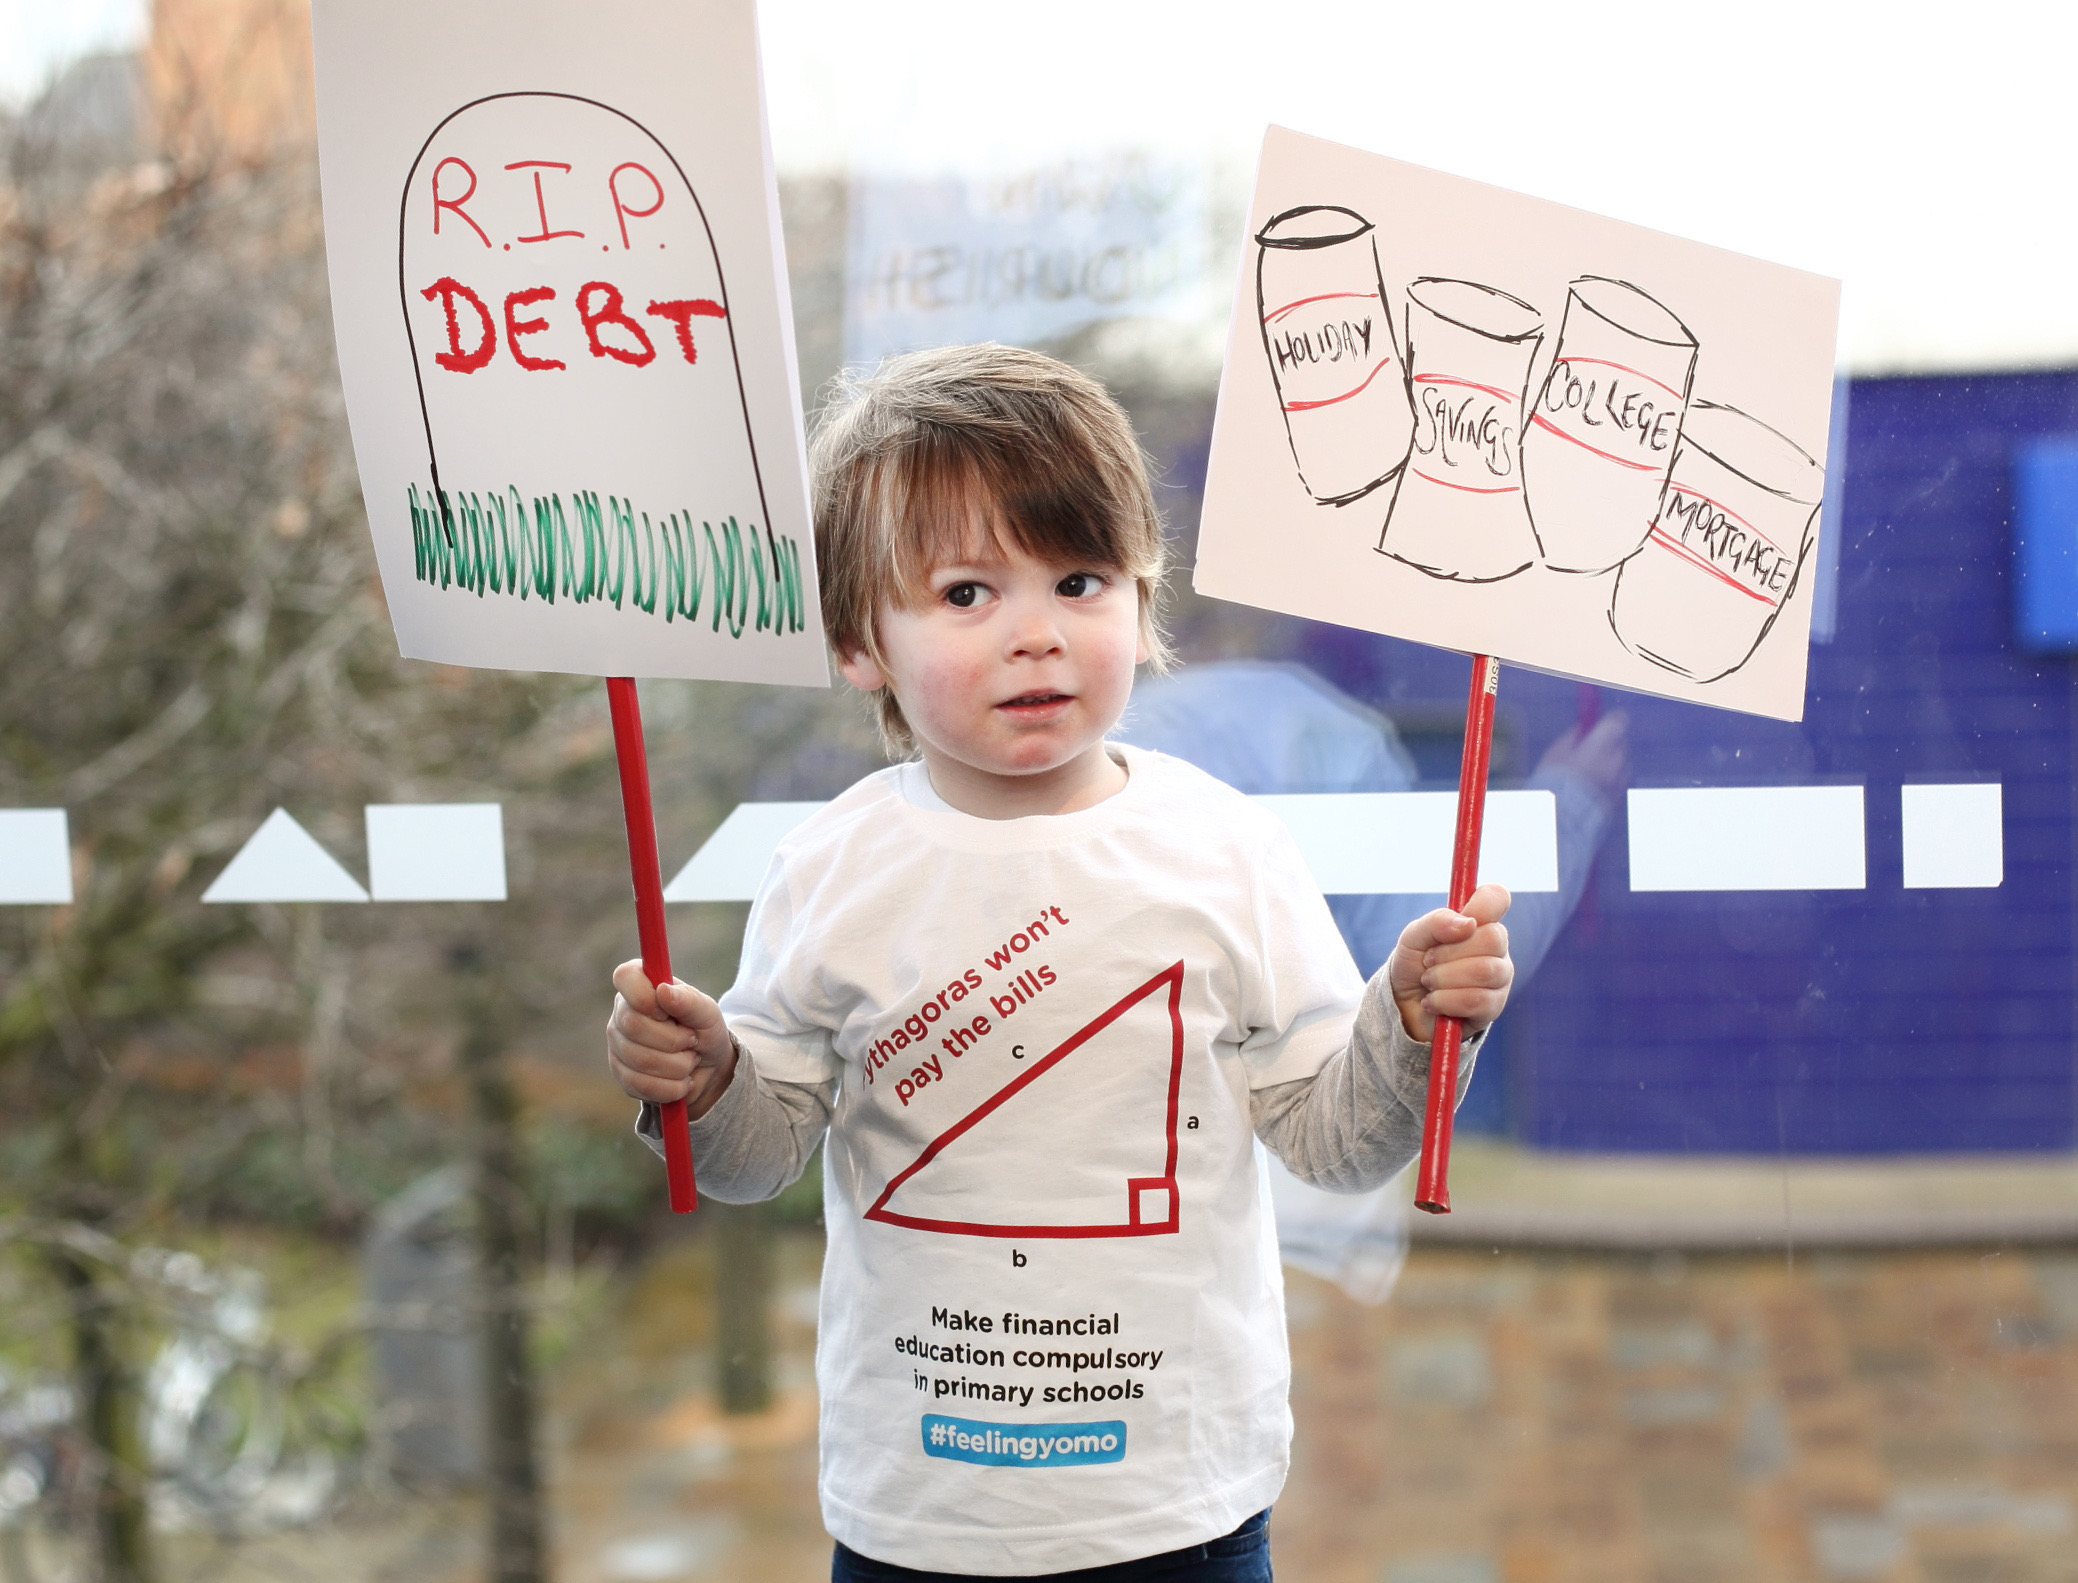 Sebastion Duncan (aged 2) protests to make financial education compulsory in UK primary schools